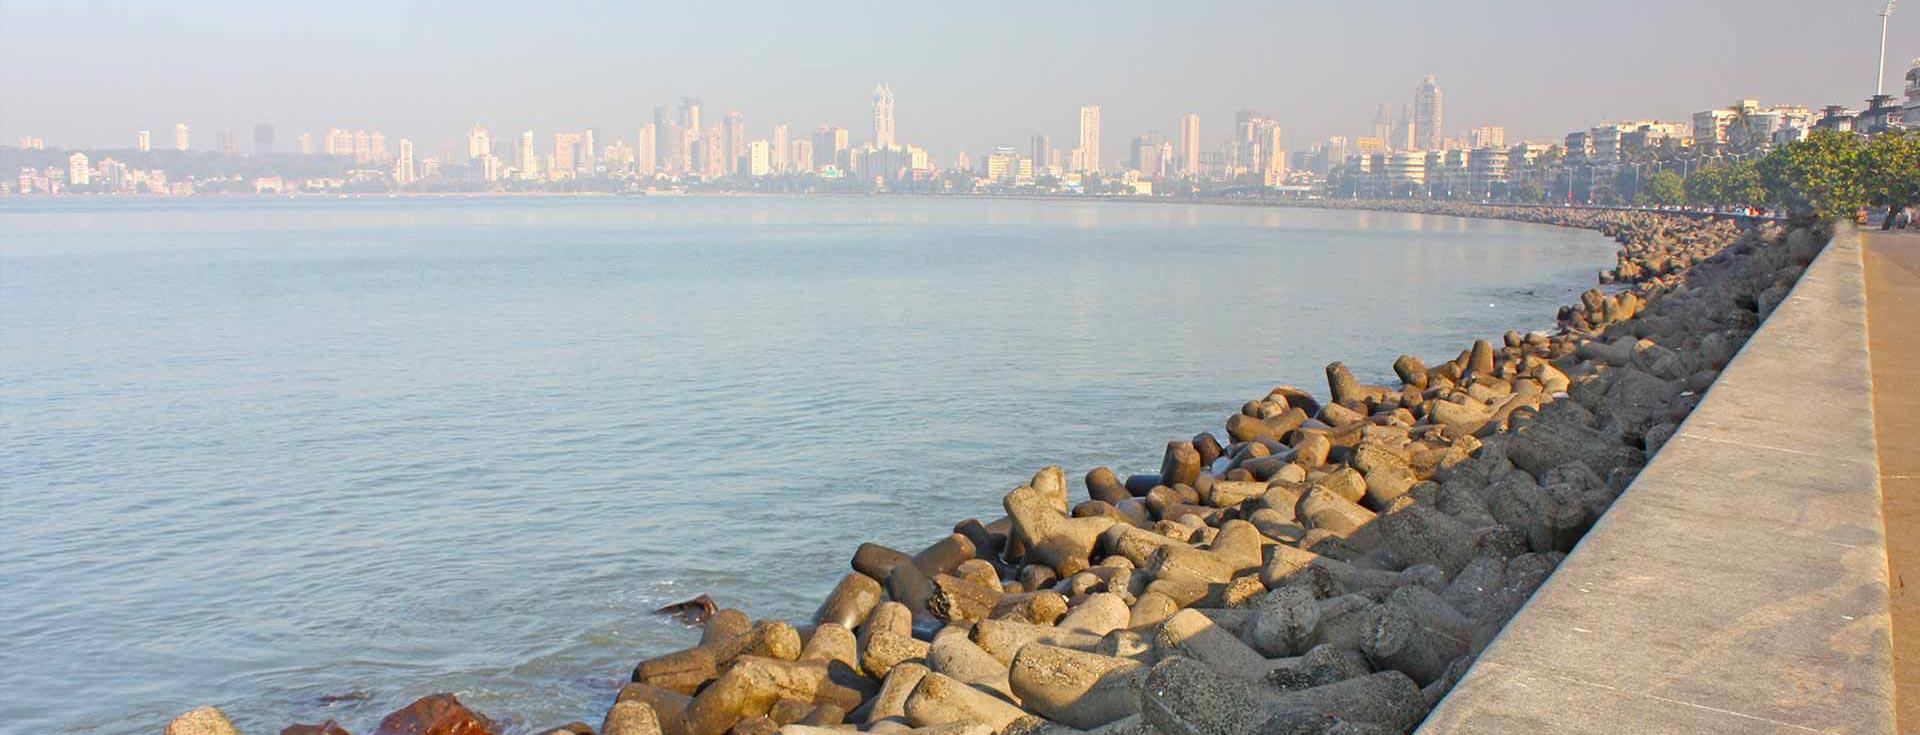 4 Things Mumbai is known for